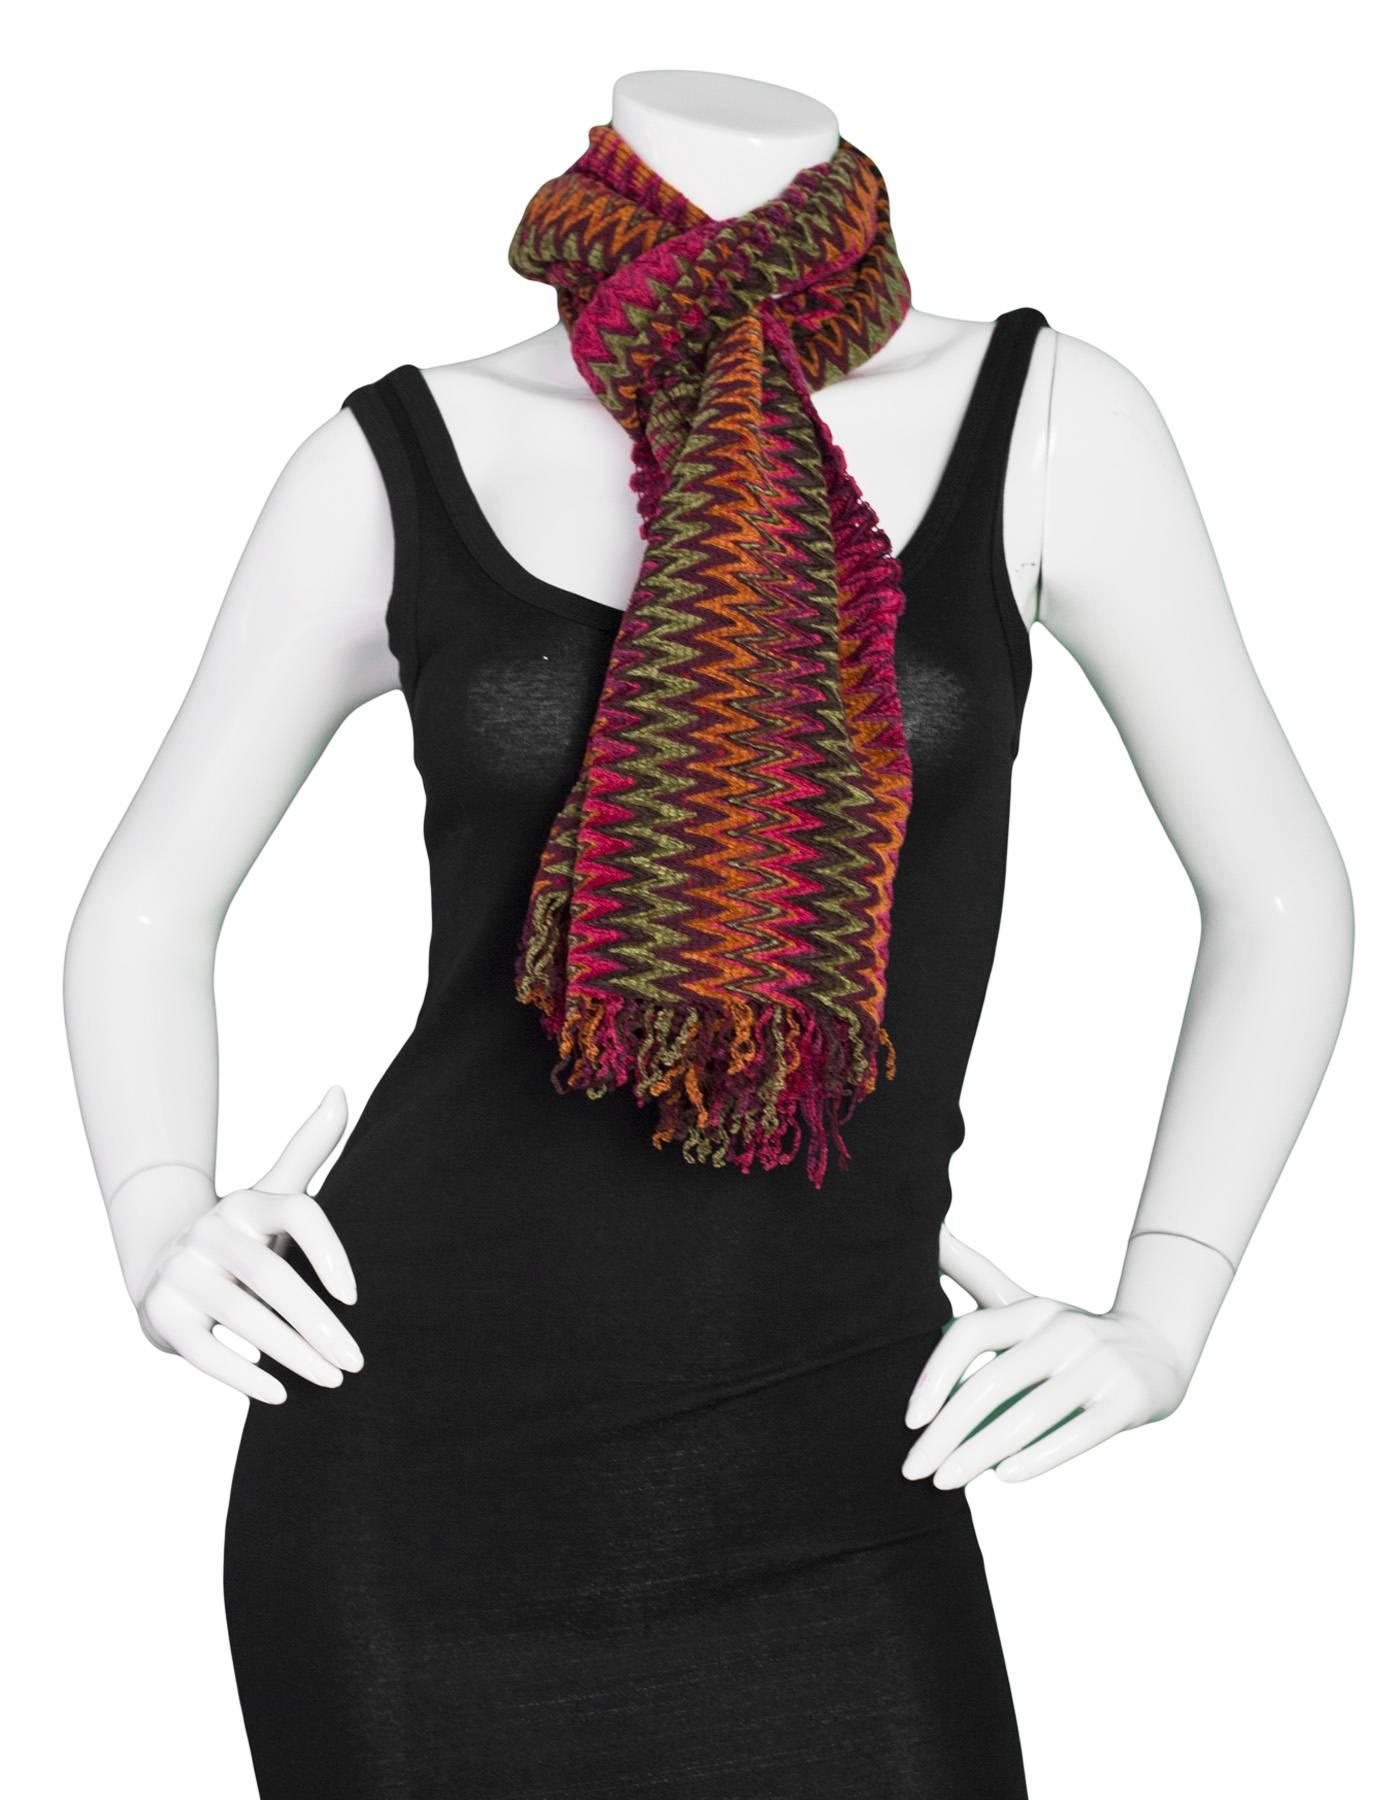 Missoni Multi-Colored Chevron Knit Wool Scarf 
Features fringe on both ends

Made In: Italy
Color: Multi-colored burgundy, magenta, green and orange
Composition: 66% acrylic, 22% wool, 12% nylon
Overall Condition: Excellent pre-owned